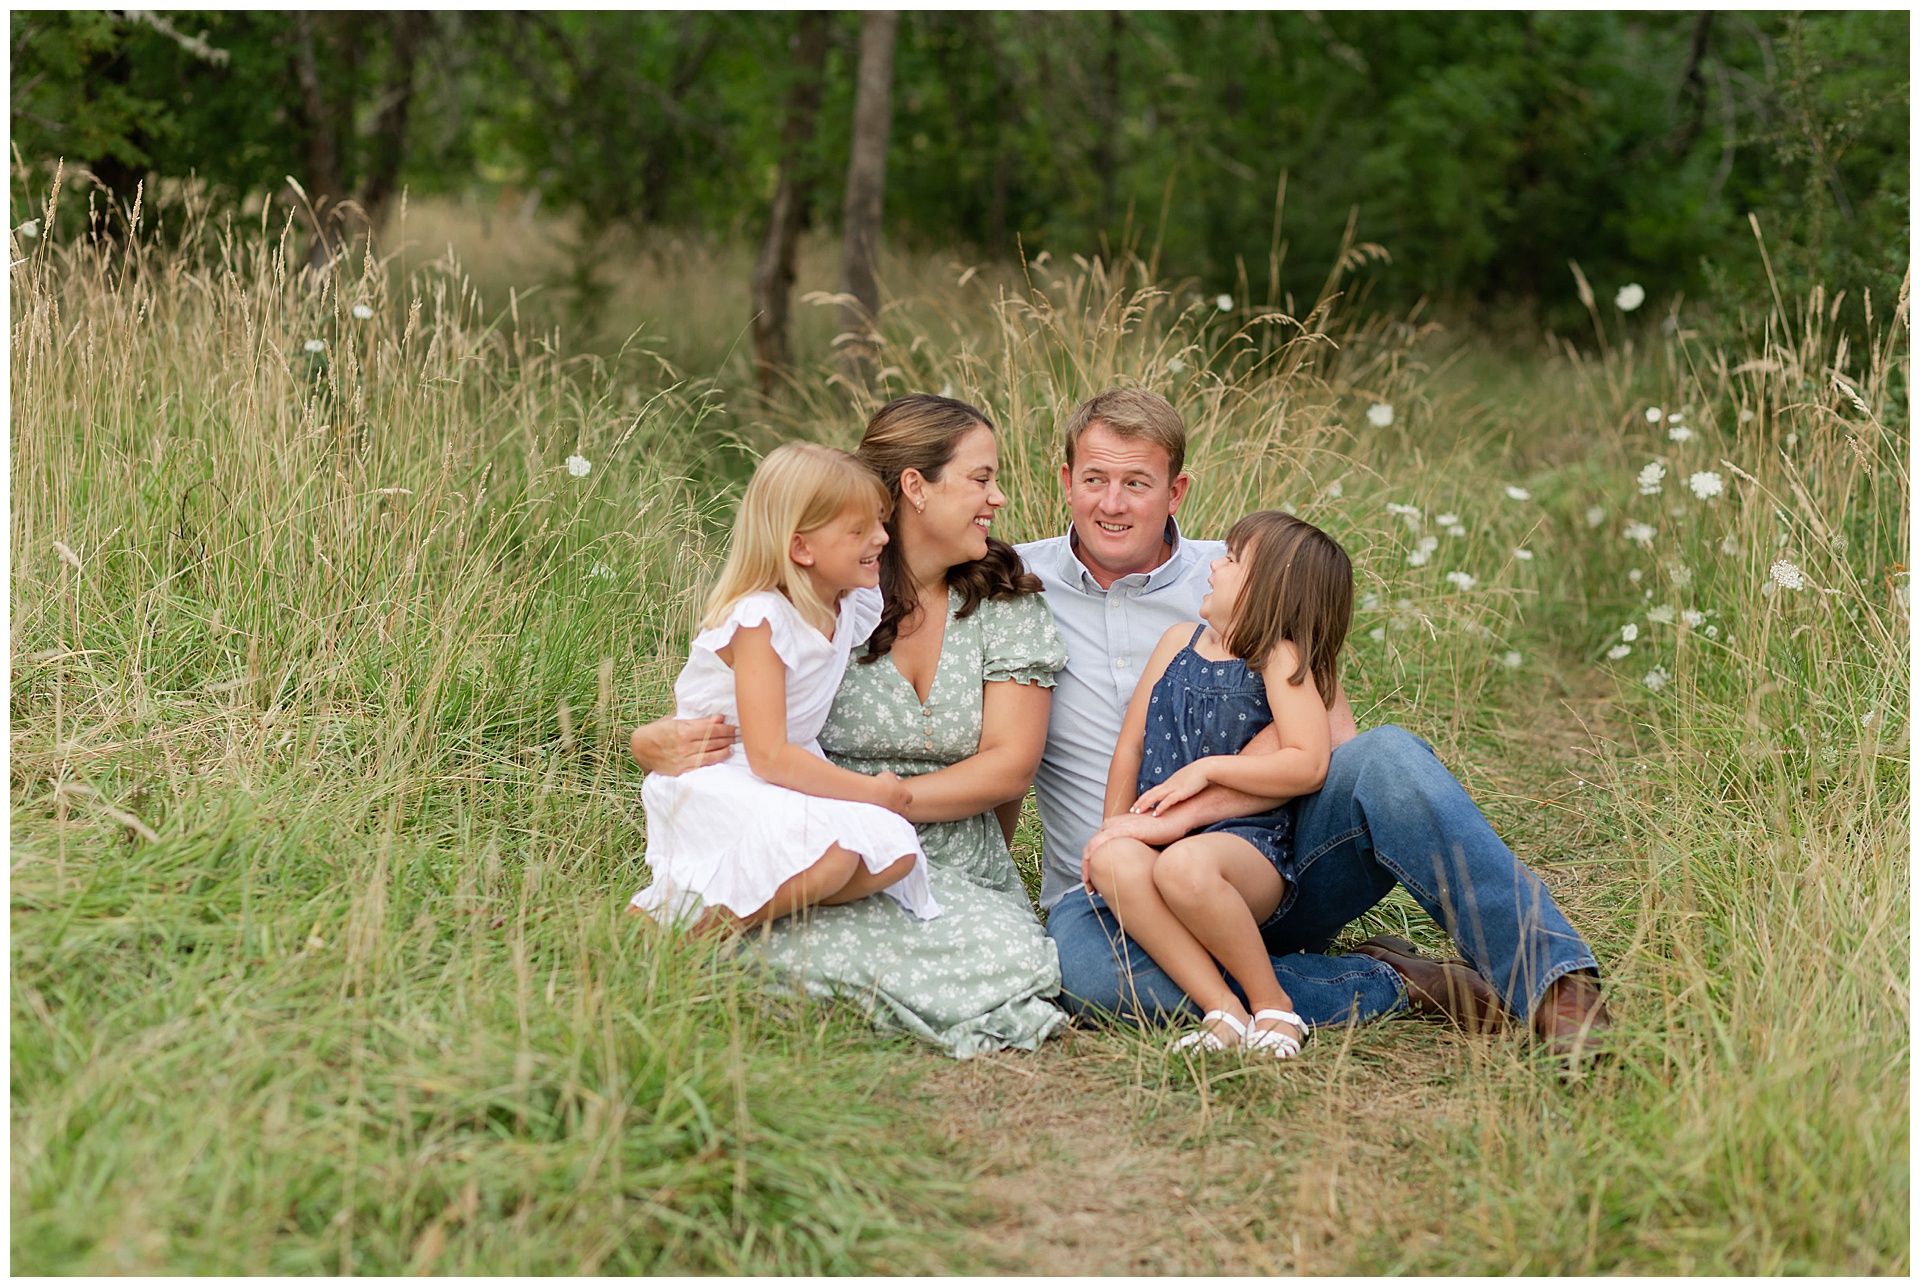 Relaxed outdoor family portraits by Thistledown Photography